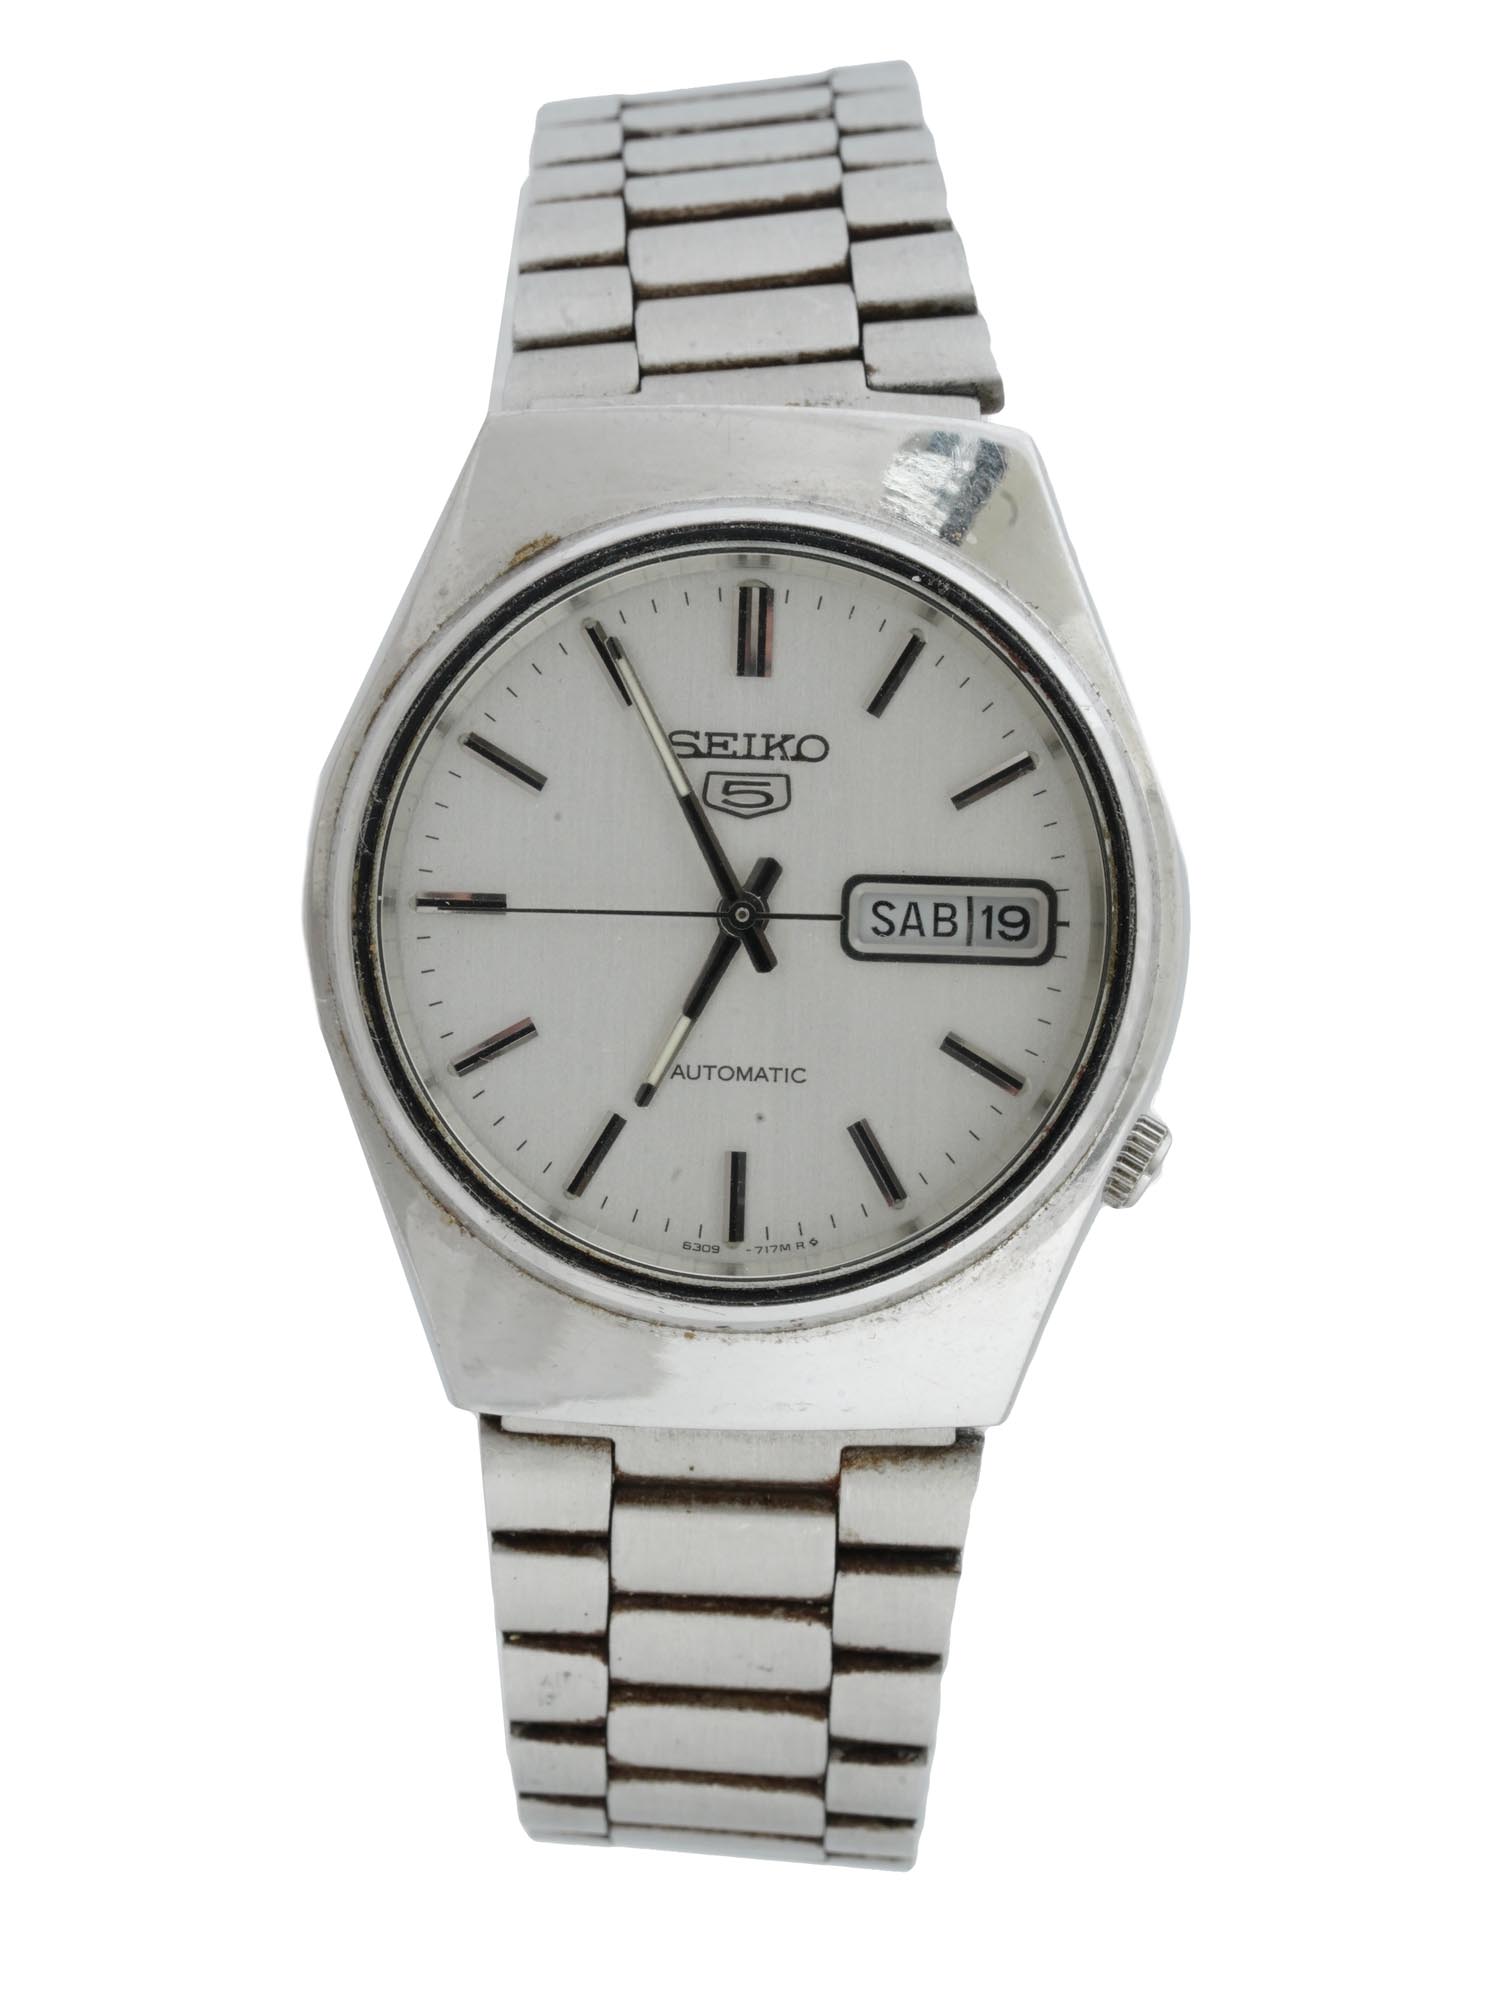 1980S SEIKO STAINLESS STEEL AUTOMATIC WRISTWATCH PIC-1